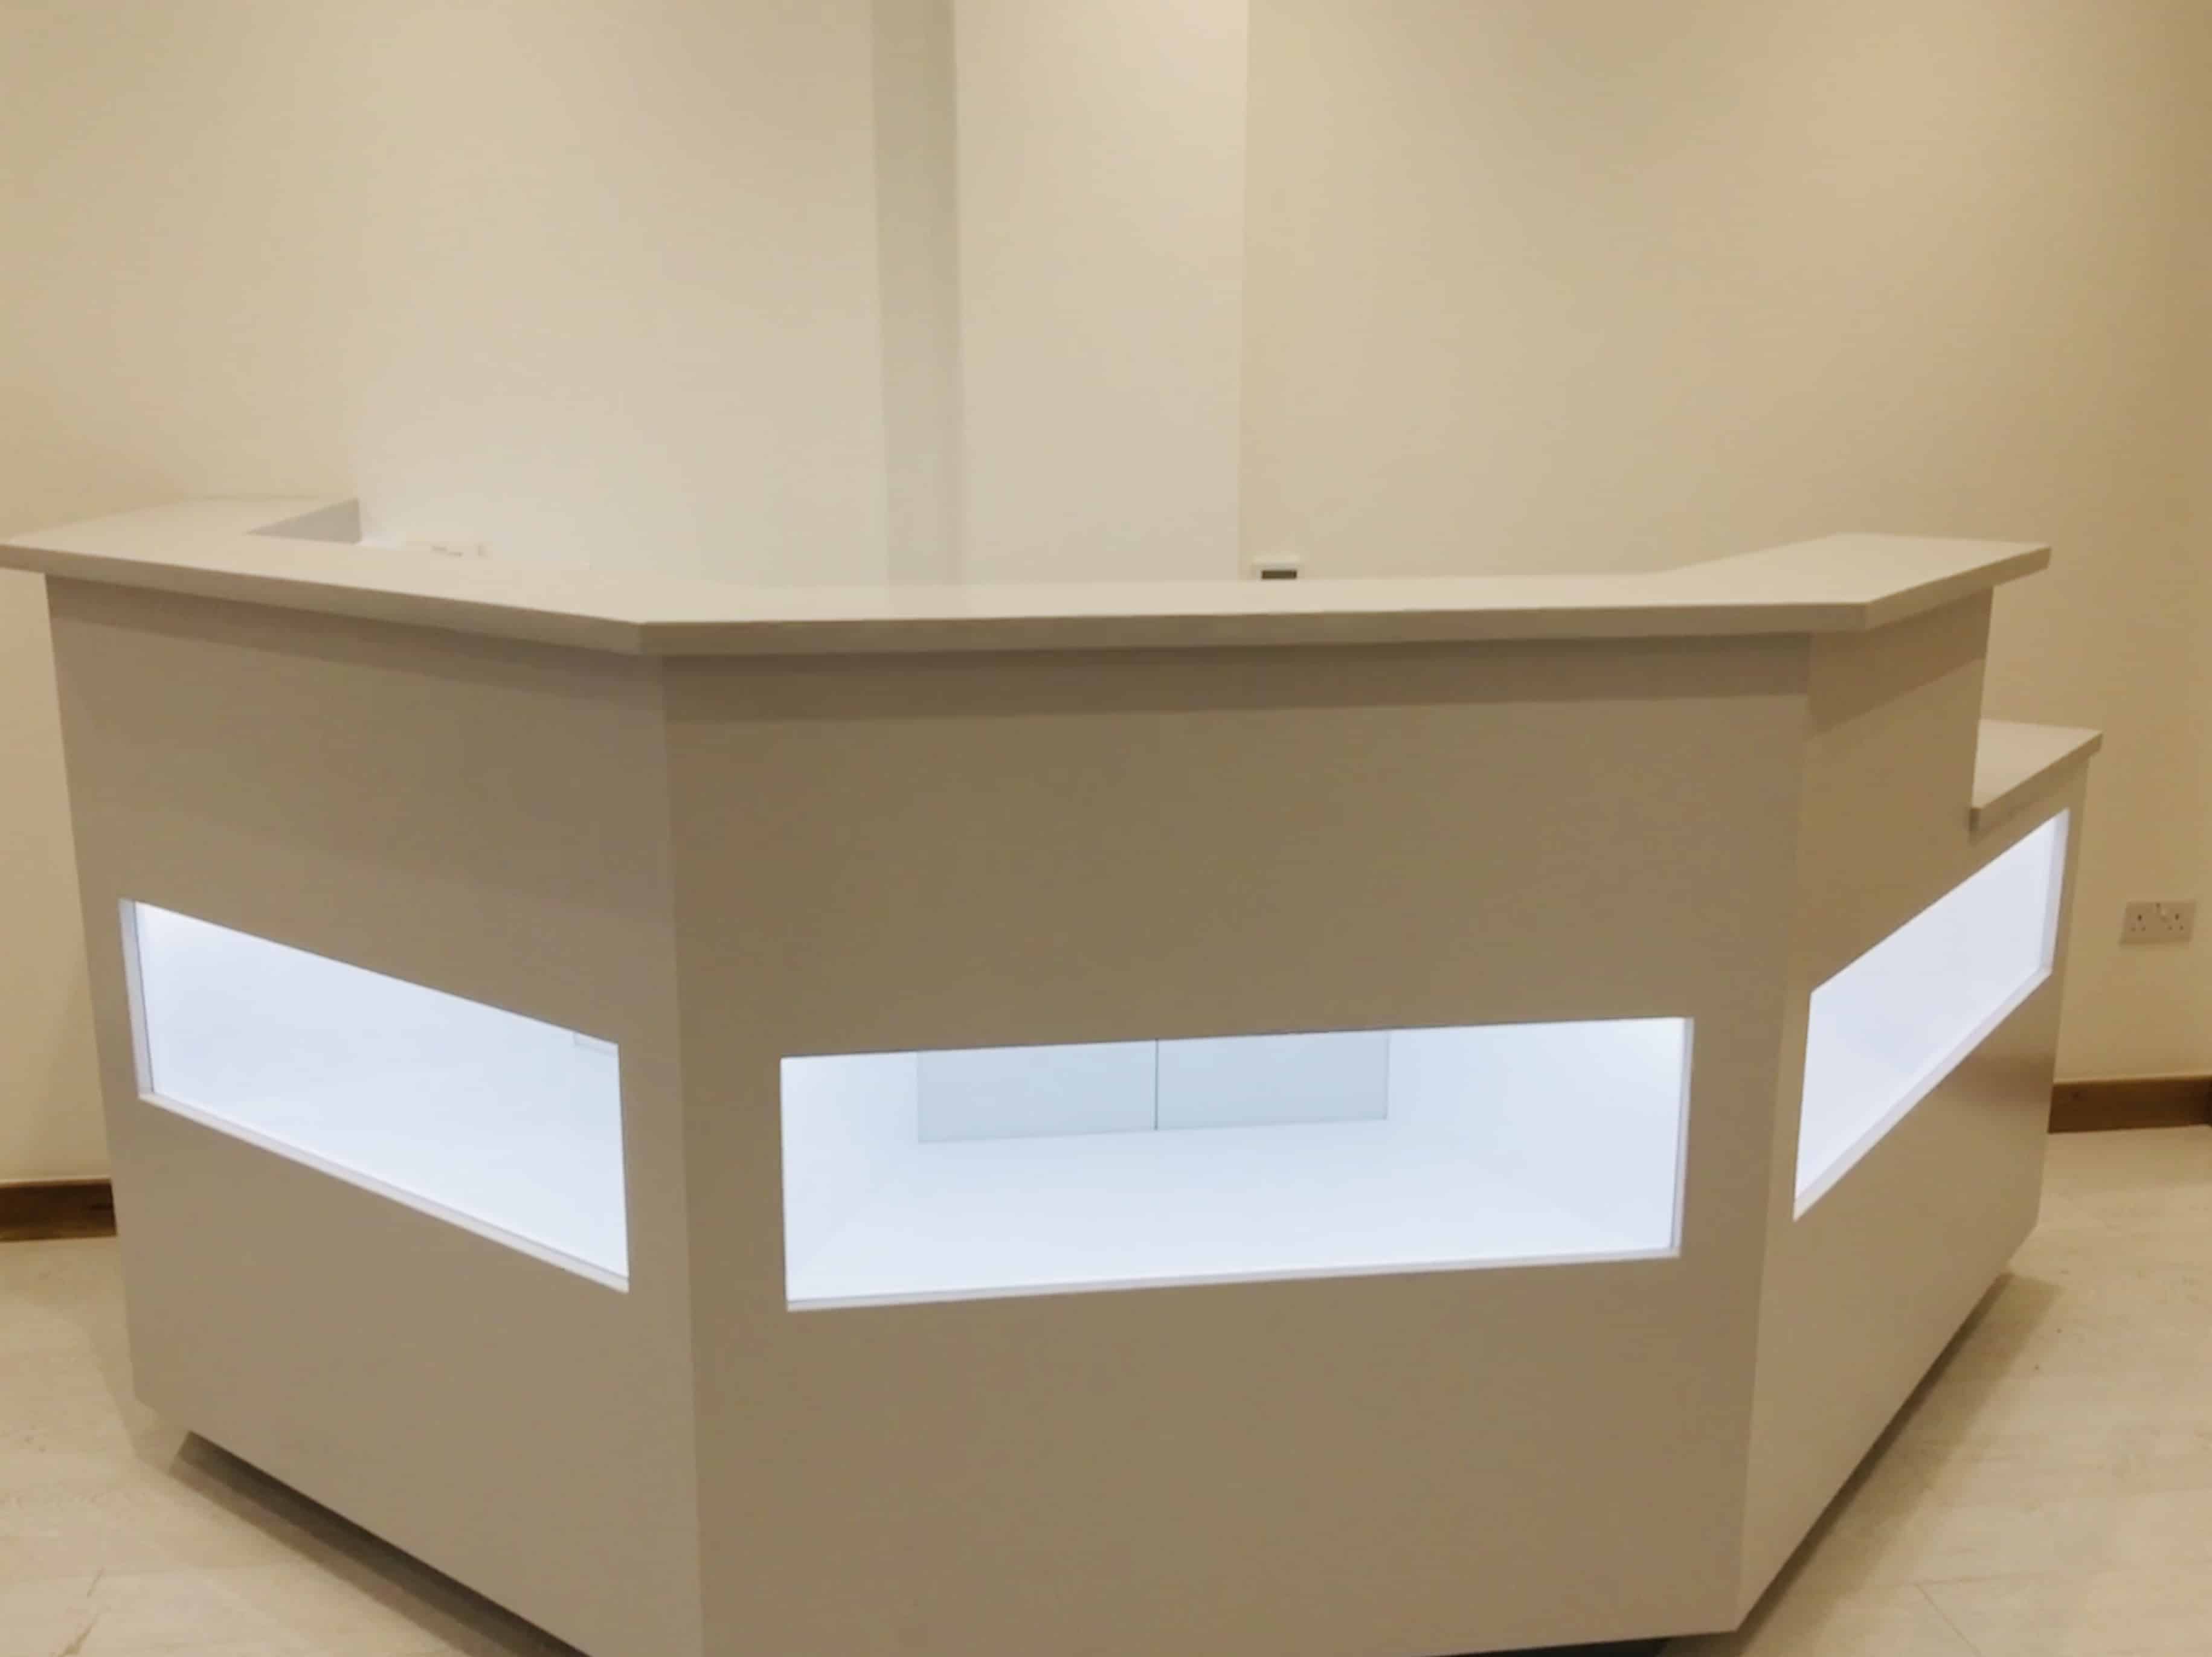 Reception desk with glass window in spa clinic.